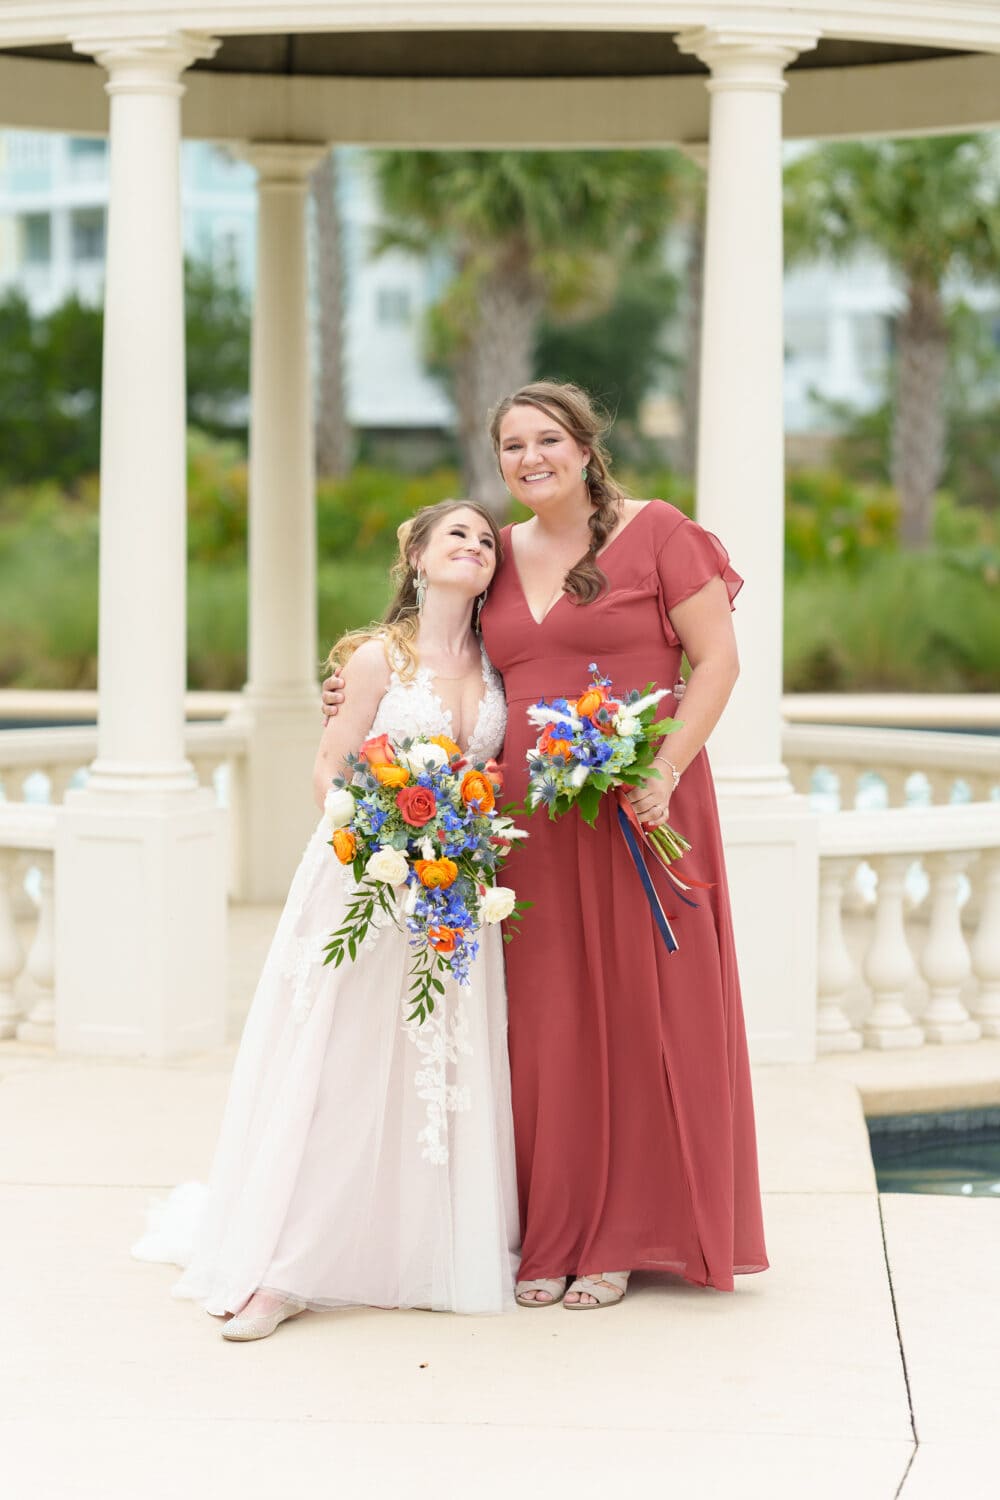 Individual portraits with bride and bridesmaids - 21 Main Events - North Myrtle Beach